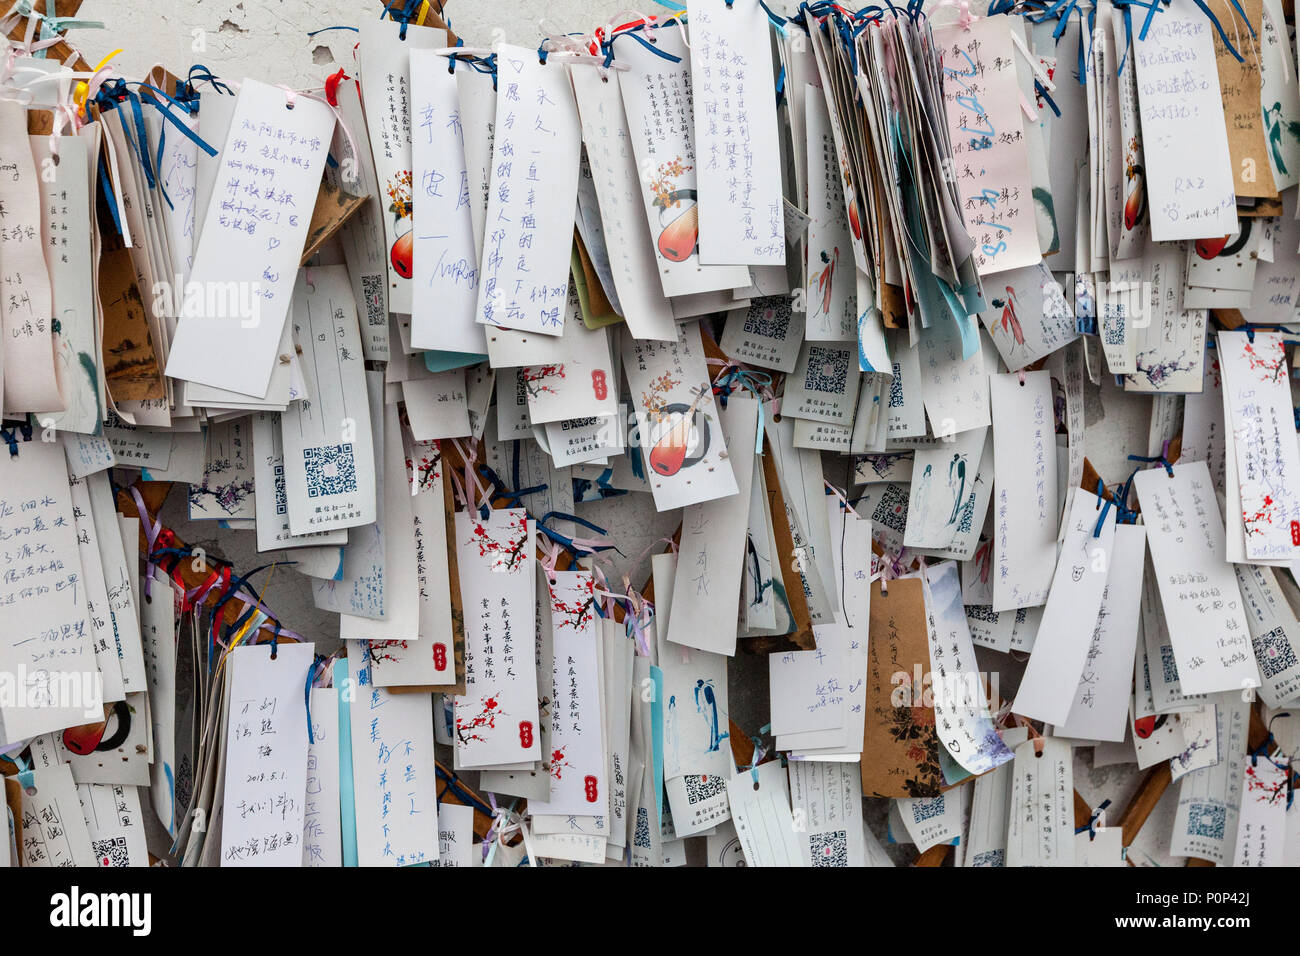 Suzhou, Jiangsu, China.  Tags Contain Hopes for Good Wishes, left by Passersby.  Shantang District. Stock Photo